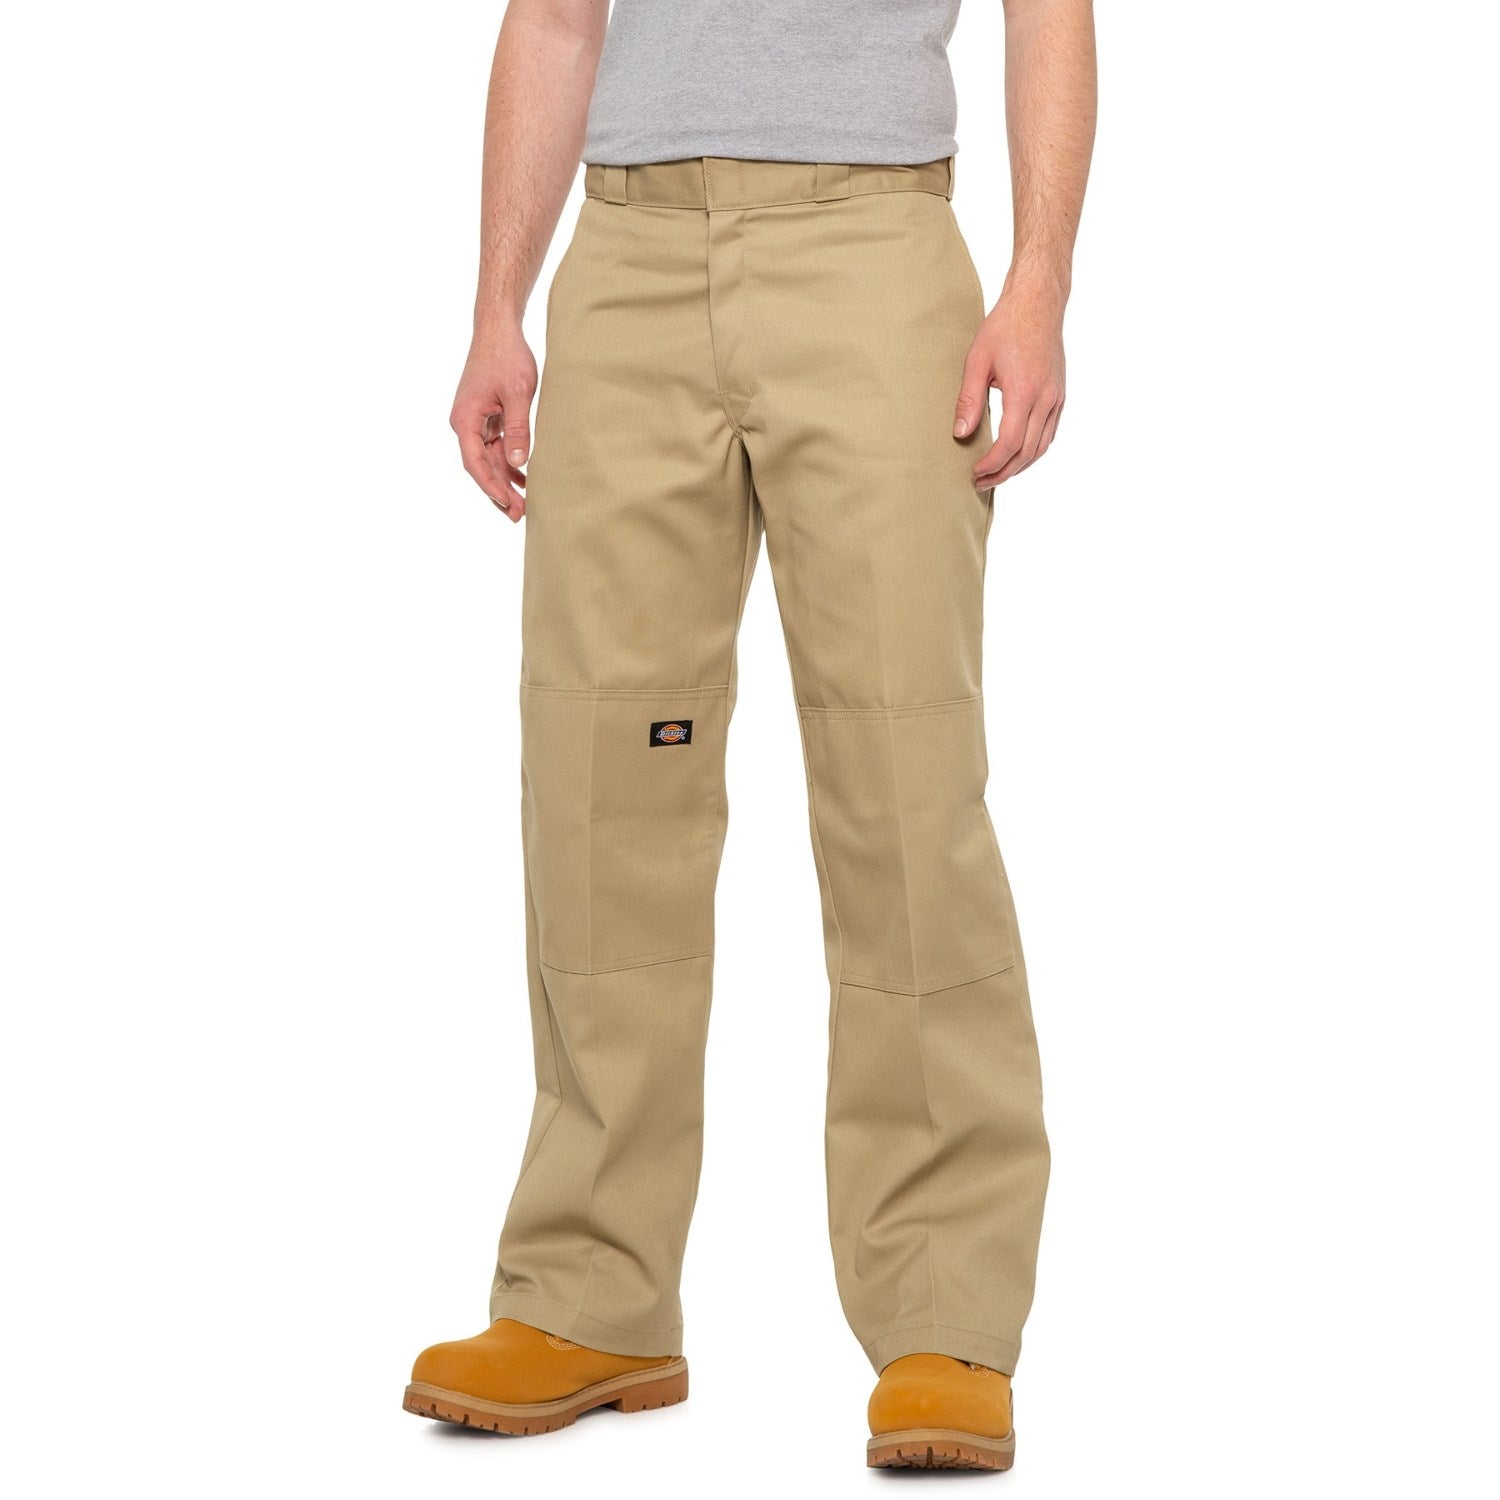 Dickies Twill Double-Knee Work Pants - Loose Fit (For Men)